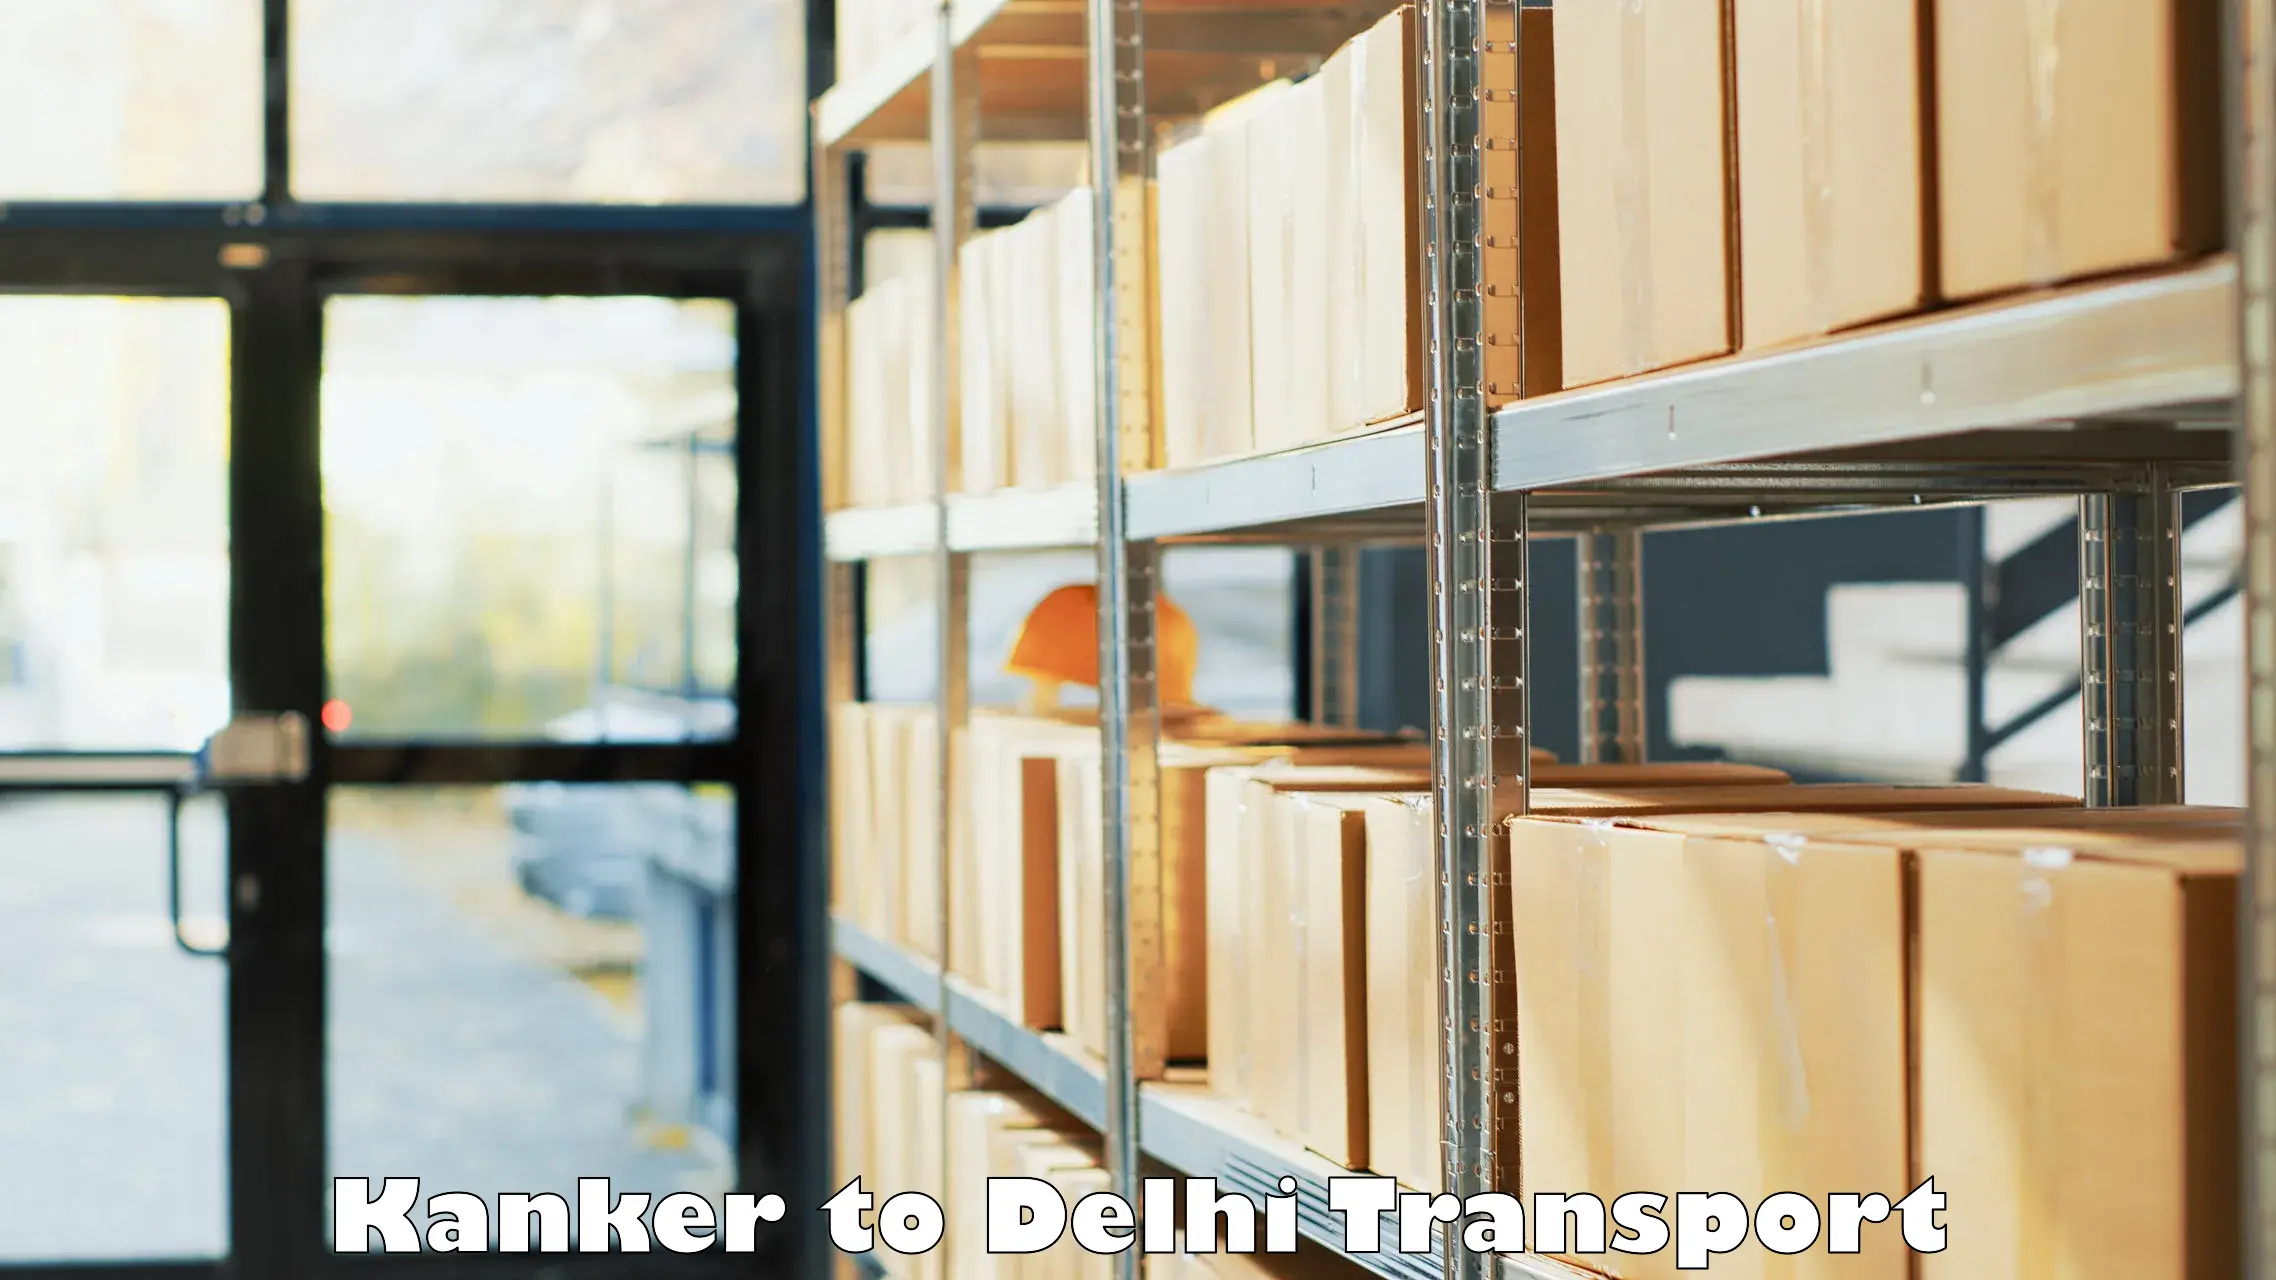 Nearby transport service Kanker to Delhi